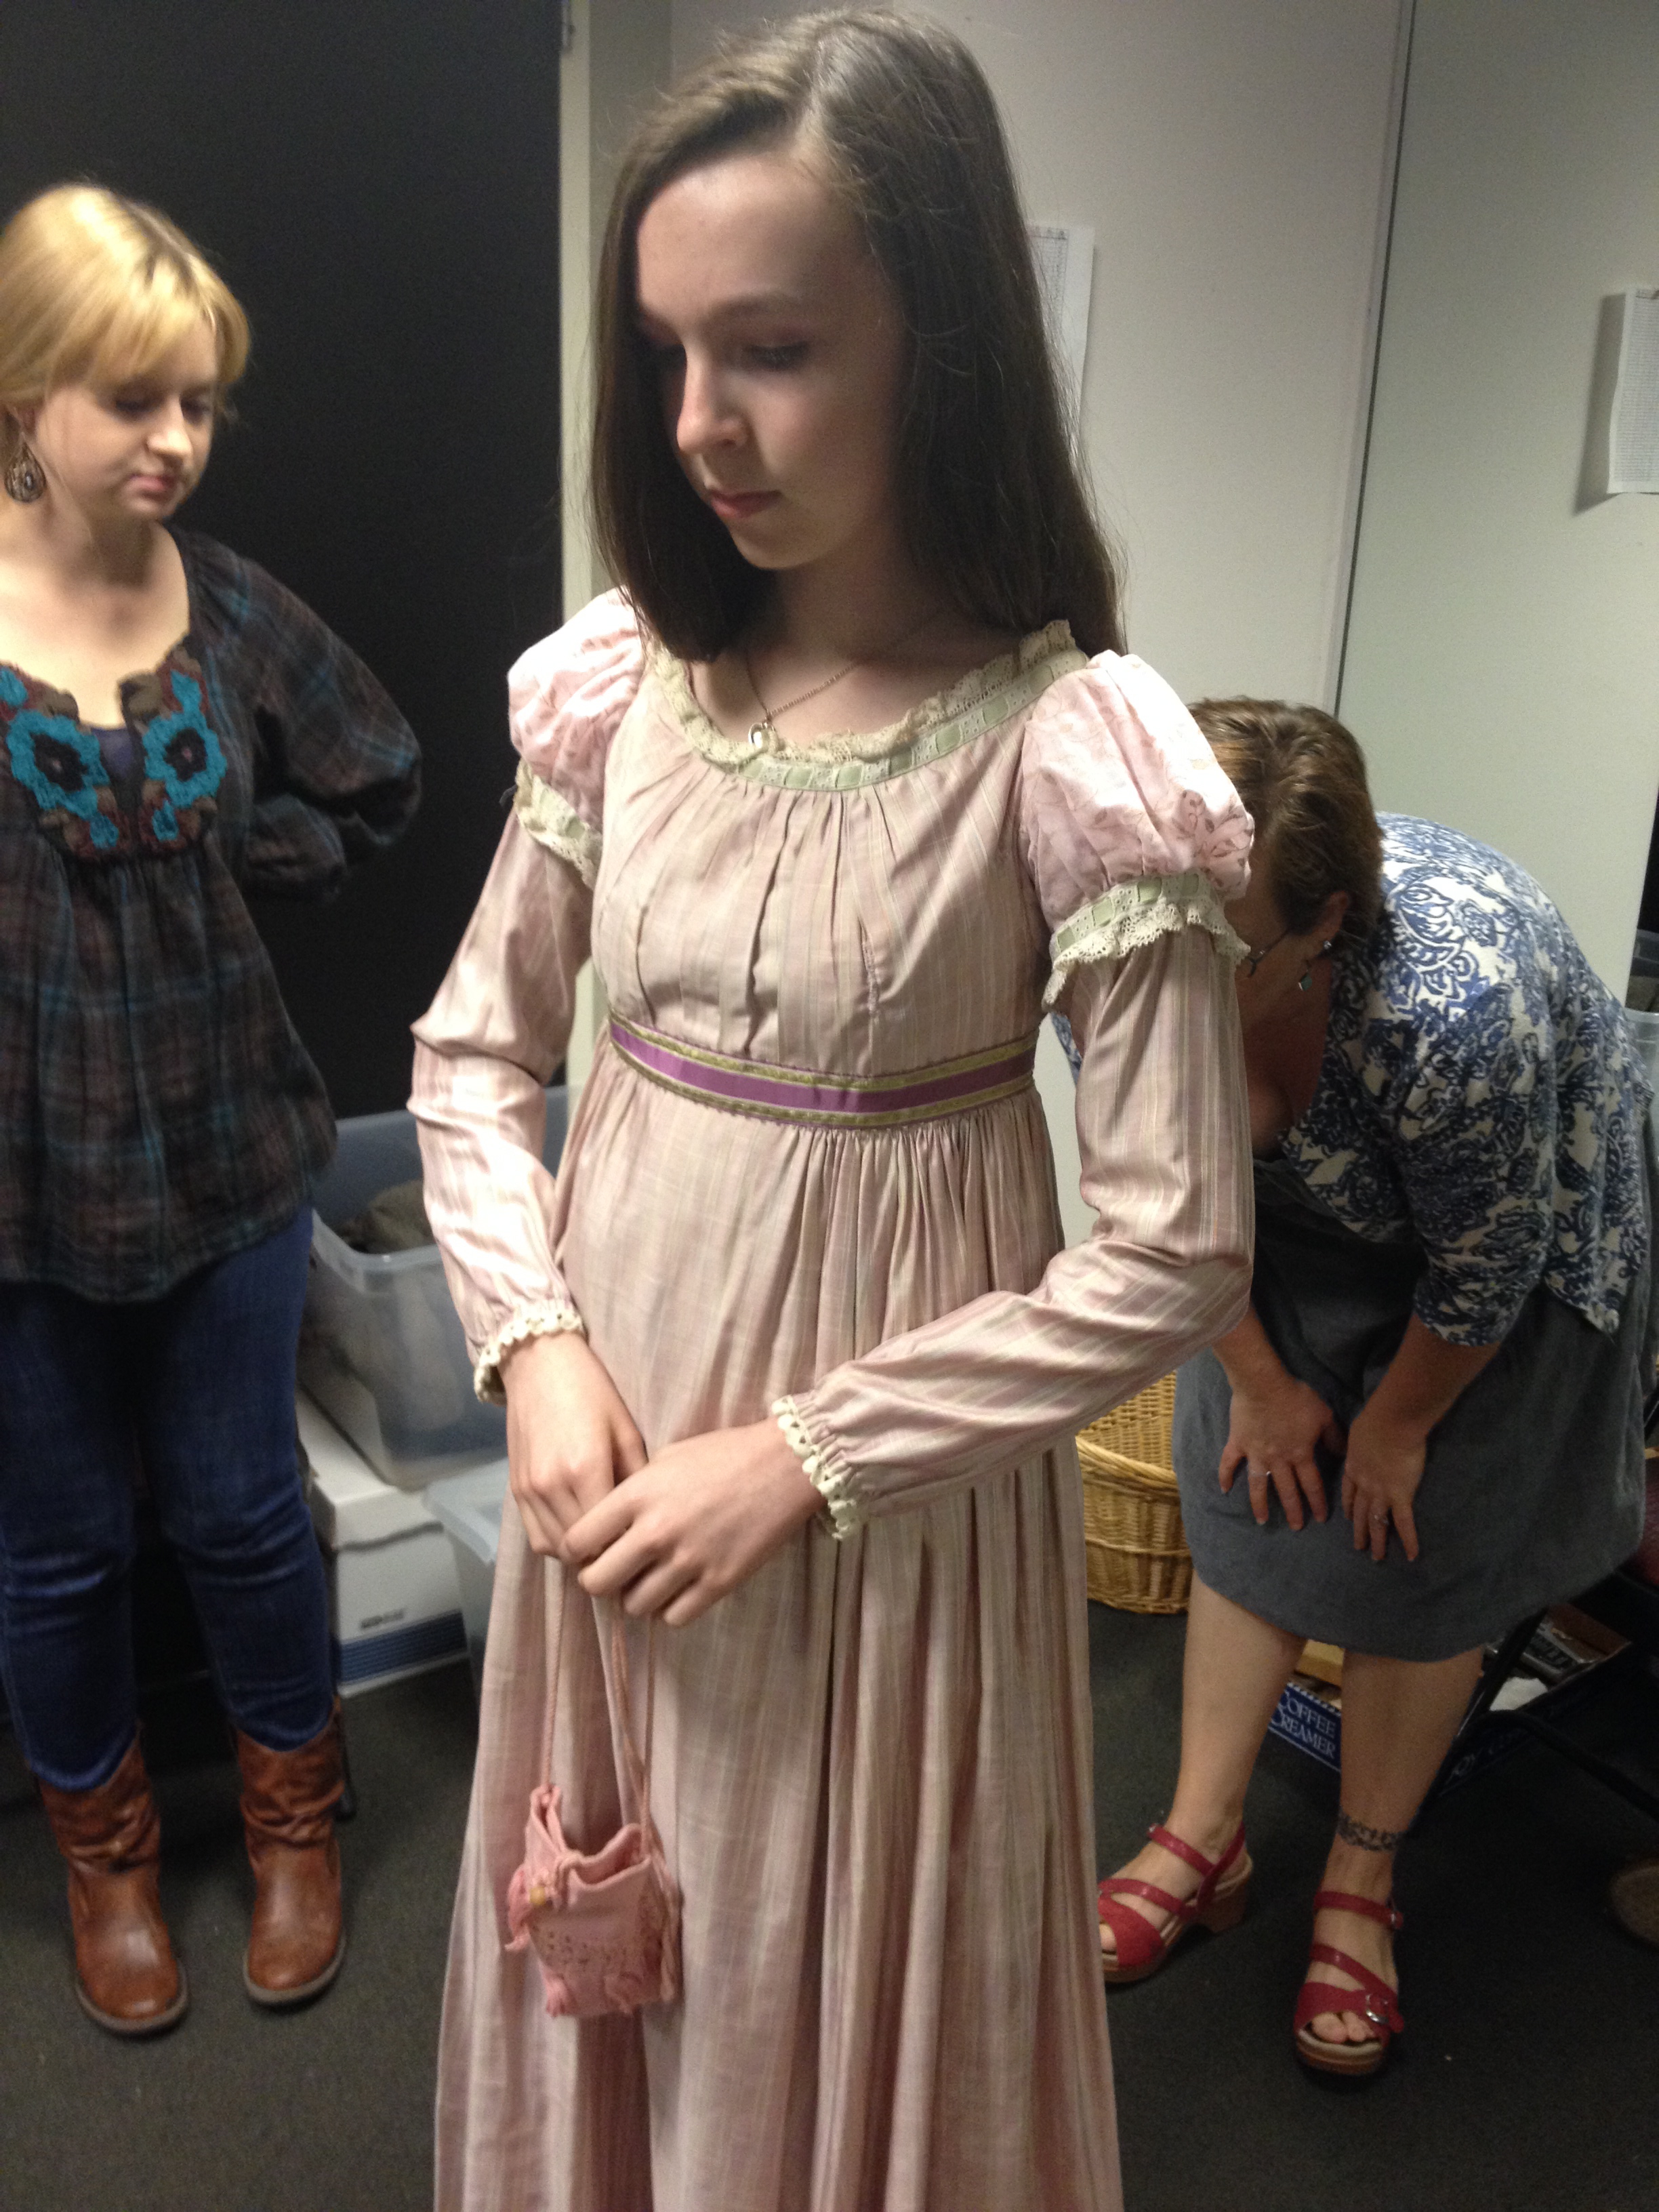 costume fittings at The Alley Theatre for A Christmas Carol